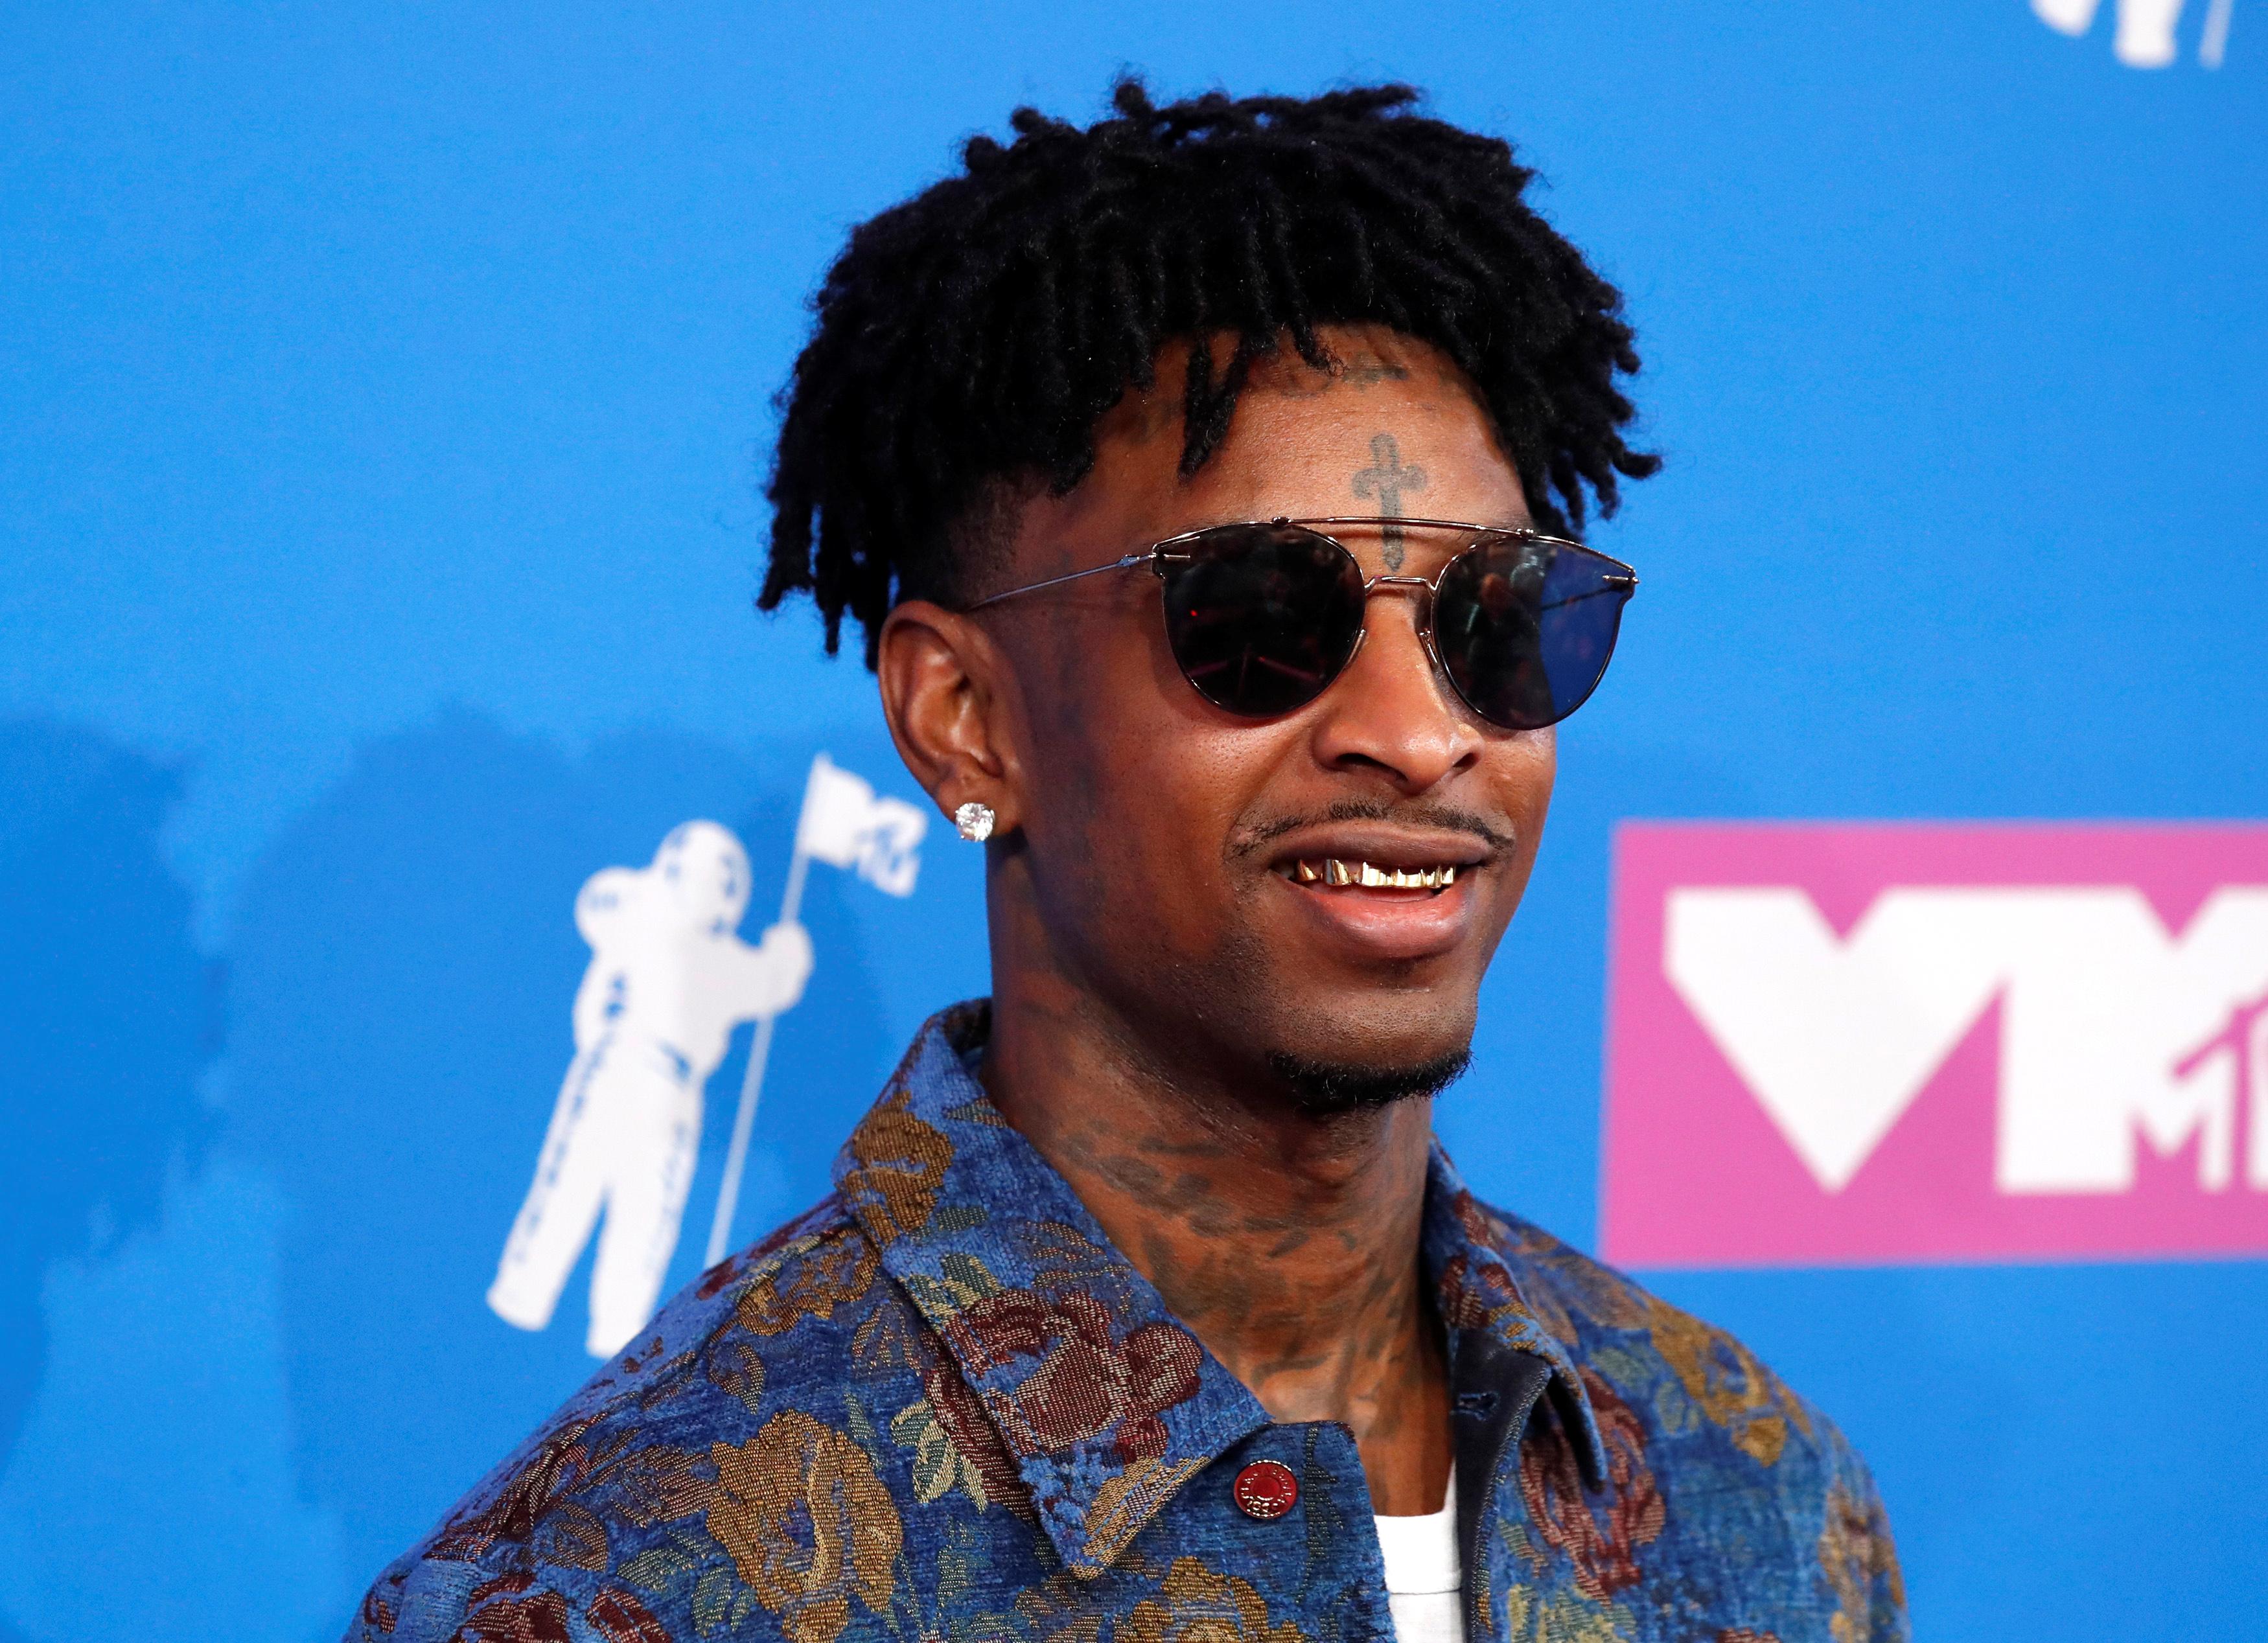 The Strange Case Of Rapper 21 Savage Shows The Weakness Of The U